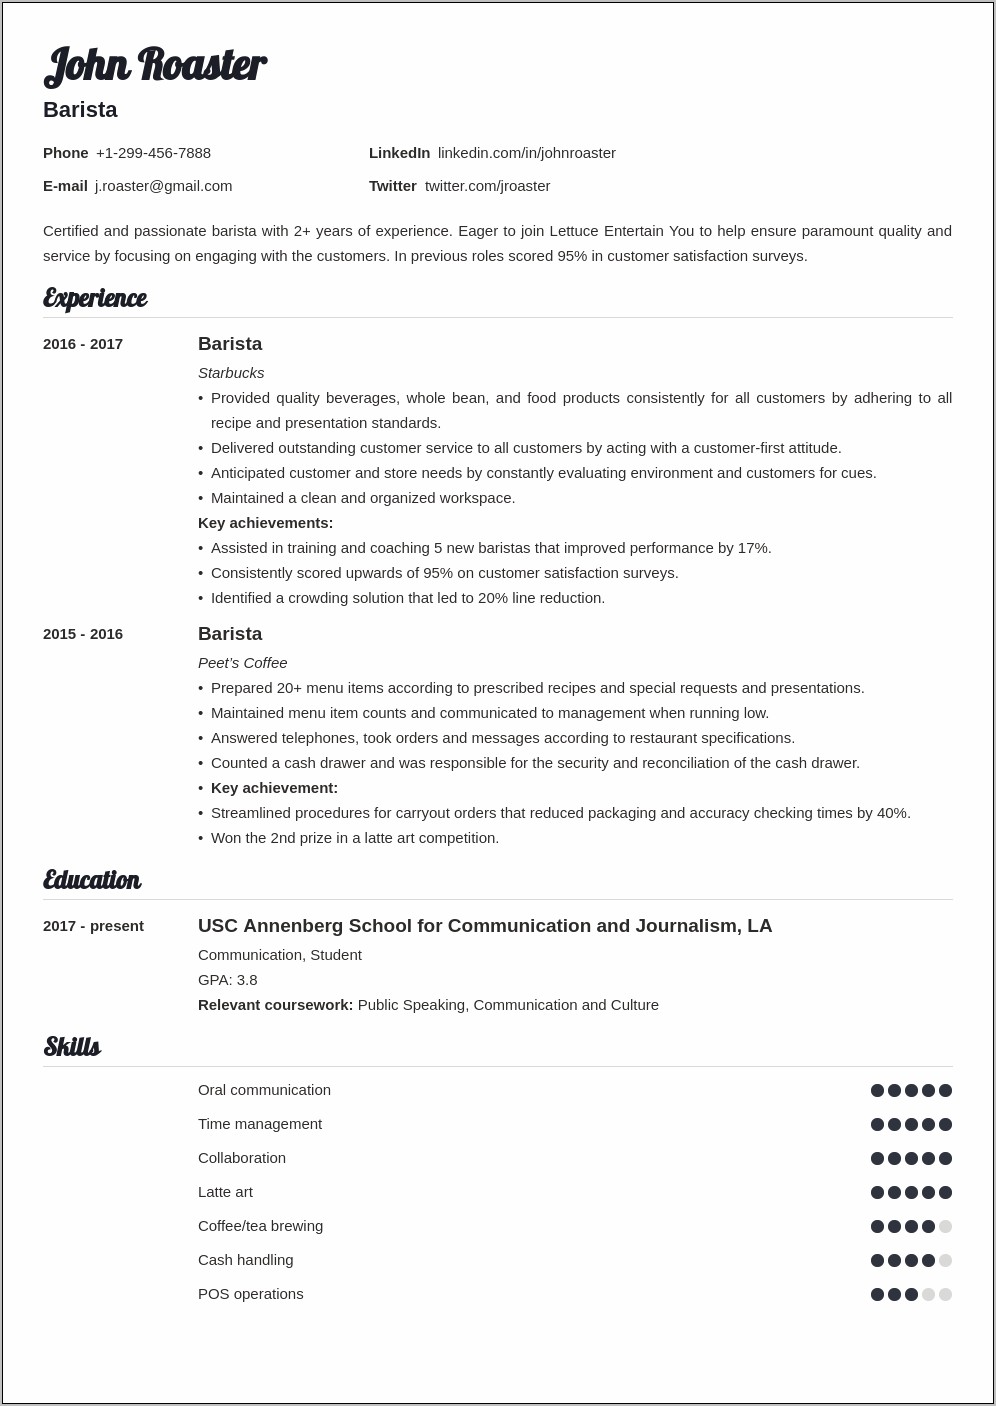 Resume Sample For Experienced Barista